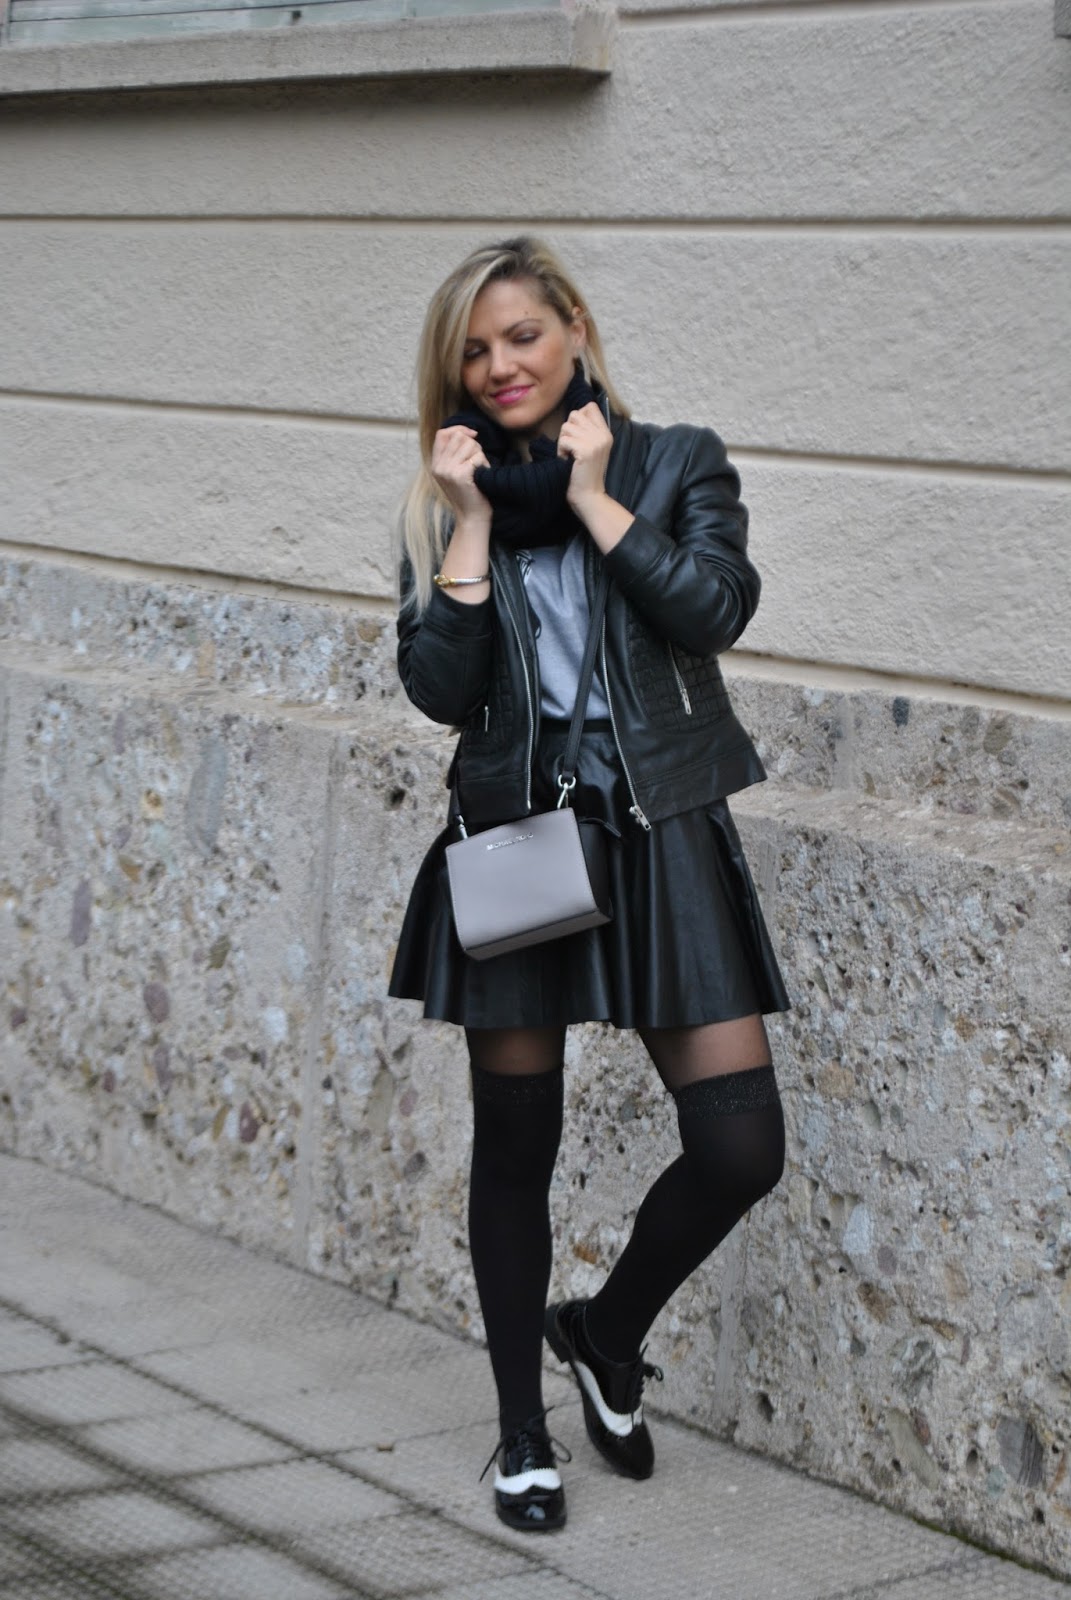 Color-Block By FelyM.: OUTFIT: BLACK LEATHER SKIRT - COME ABBINARE UNA ...